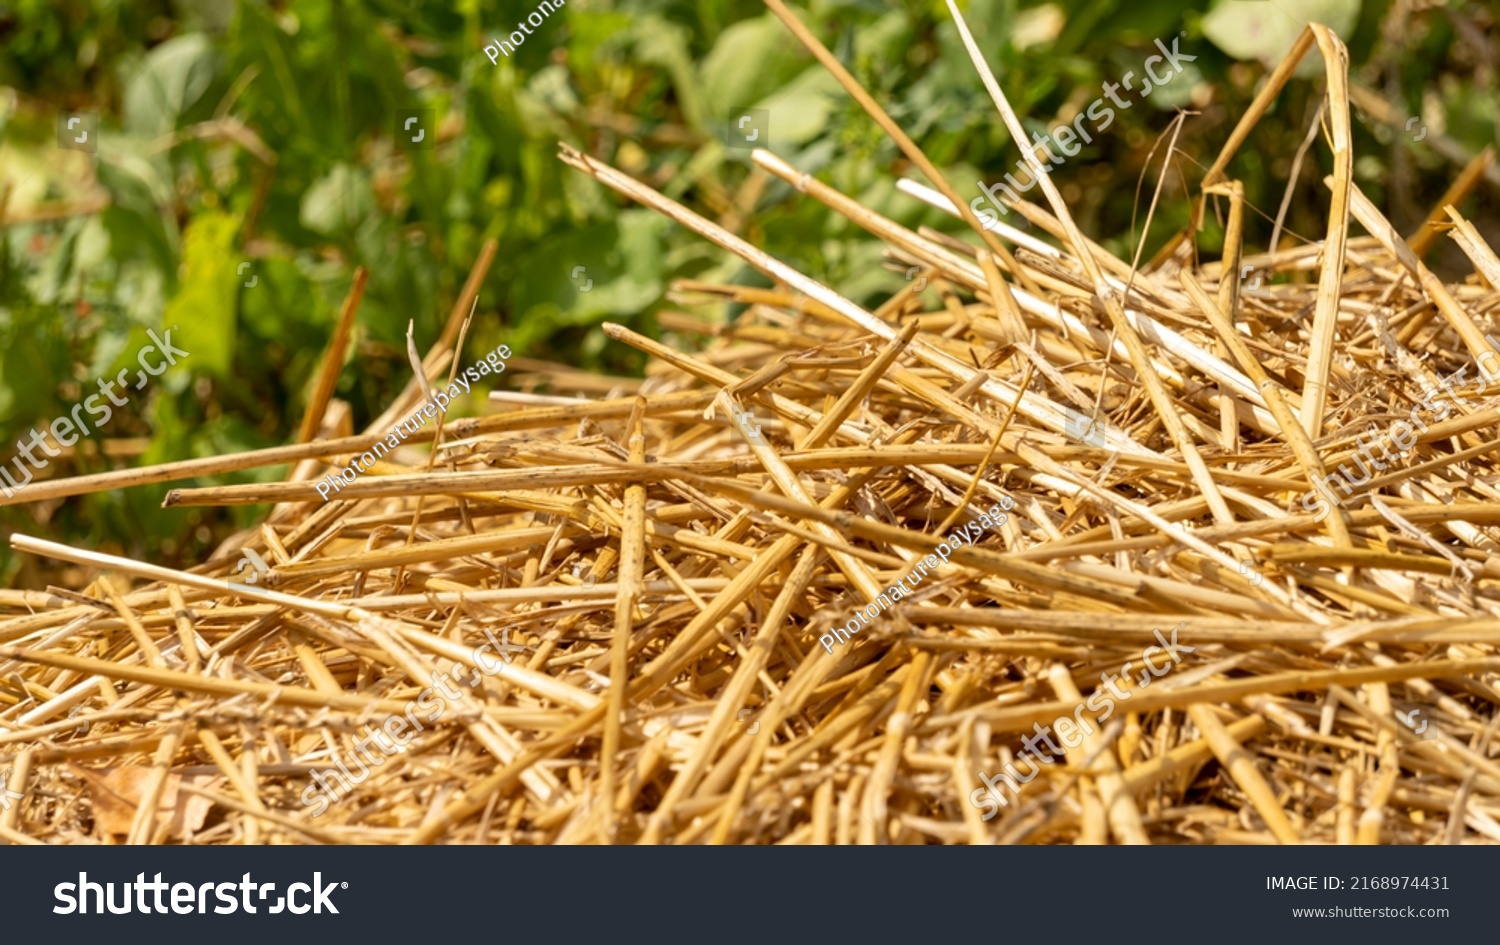 Close-up of dried straw to protect crops from drought, in vegetable garden #2168974431